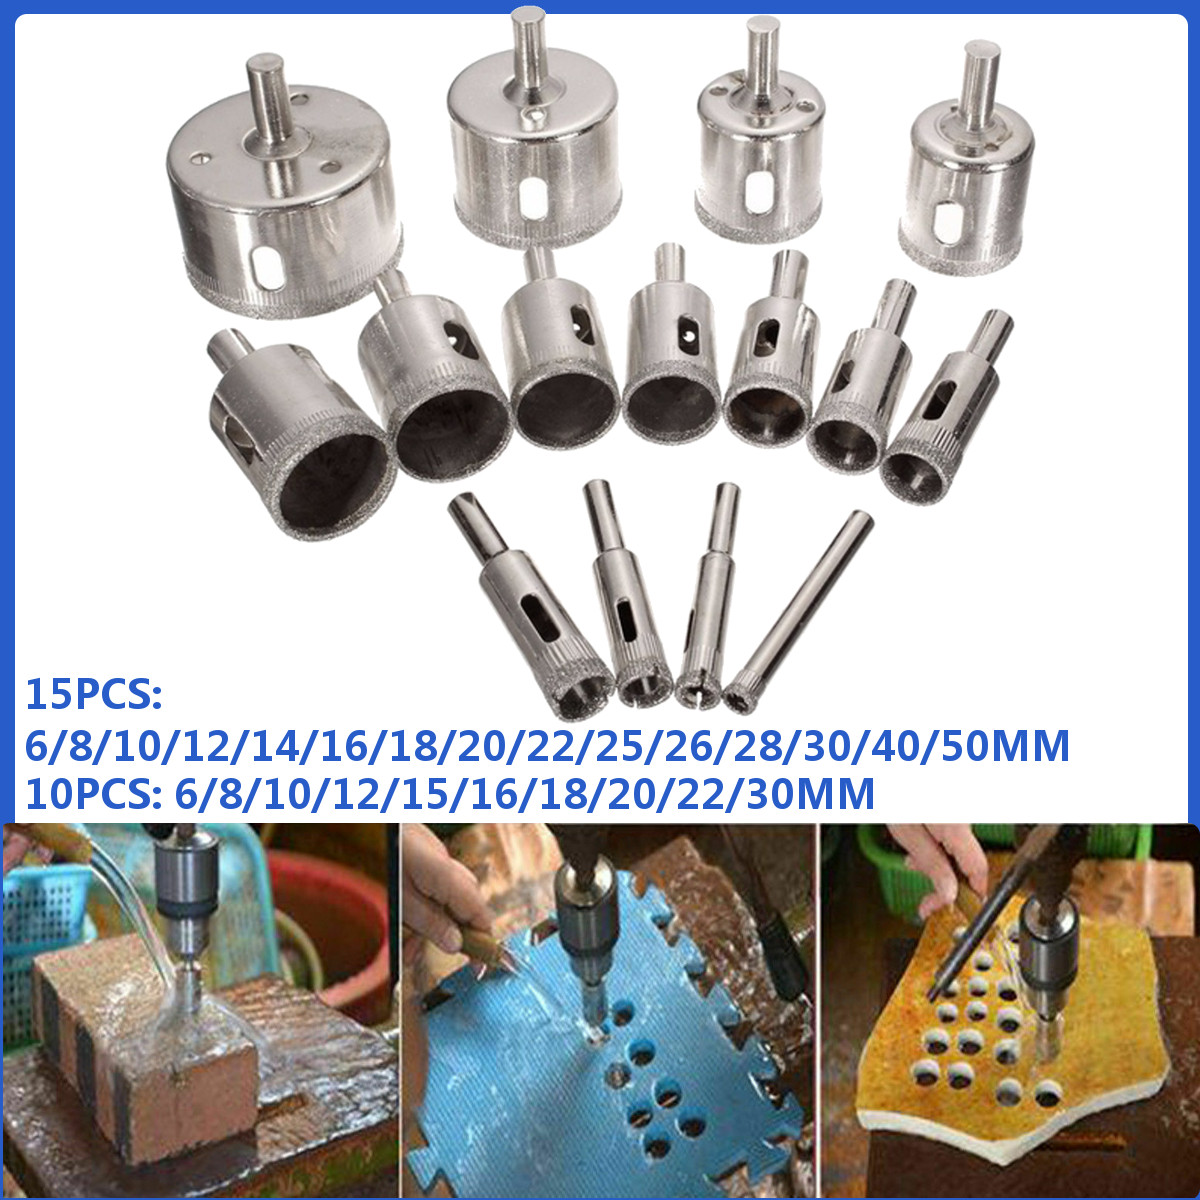 

10pcs 6-30mm or 15pcs 6-50mm Diamond Hole Saw Cutter Set Drill Bit For Tile Marble Glass